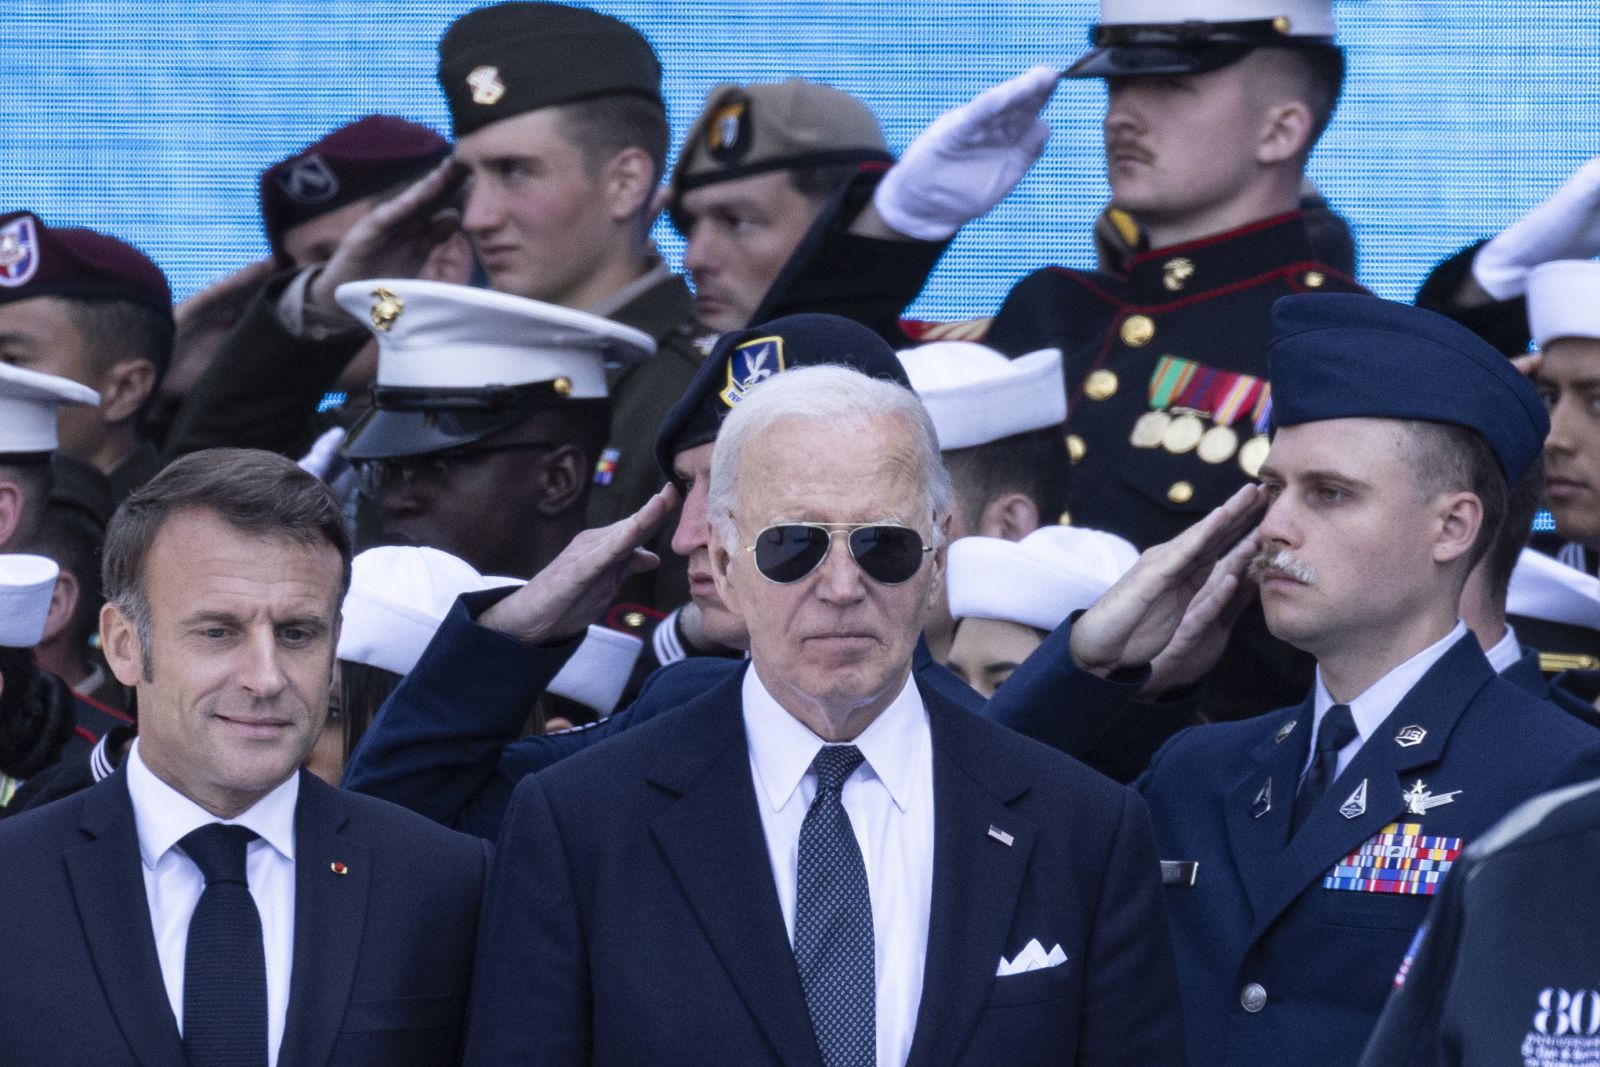 epa11394632 US President Joe Biden (C) and French President Emmanuel Macron (L) arrive to attend a commemorative ceremony for the 80th anniversary of D-Day landings in Normandy at American War Cemetery in Colleville-sur-Mer, France, 06 June 2024. More than 160,000 Western allied troops landed on beaches in Normandy on 06 June 1944 launching the liberation of Western Europe from Nazi occupation during World War II.  EPA/ANDRE PAIN